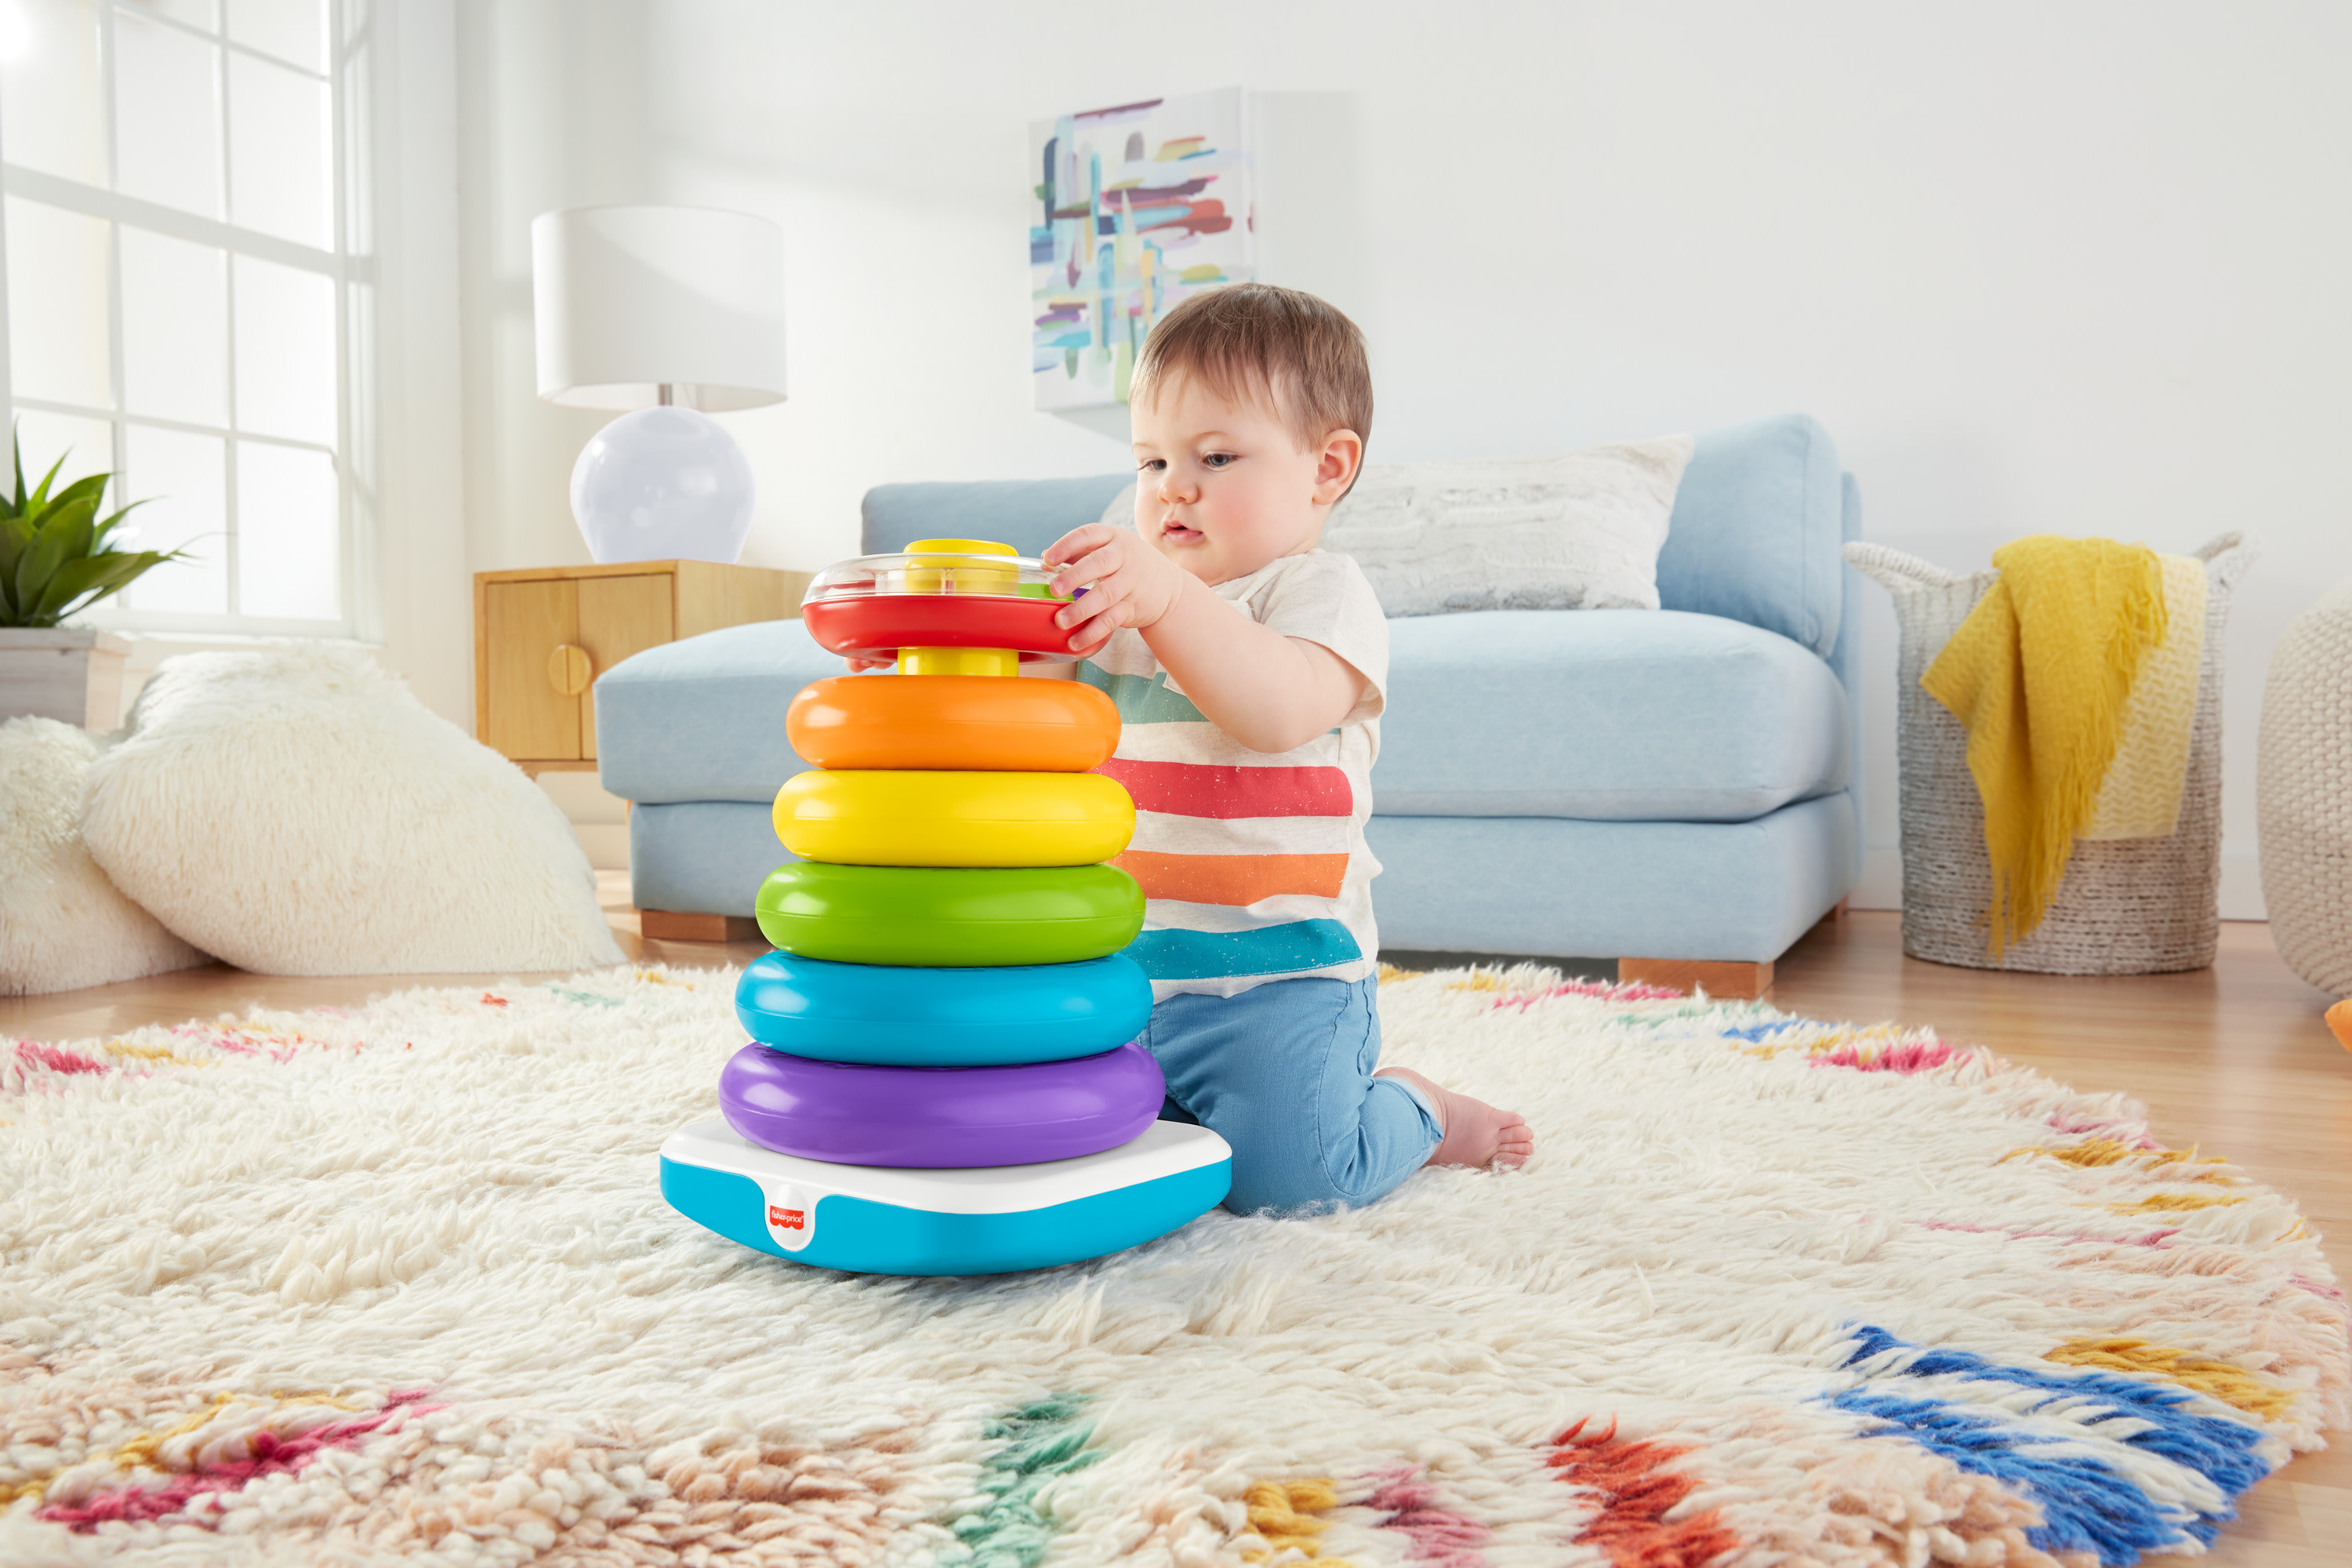 Fisher-Price Giant Rock-a-Stack Infant and Toddler Stacking Toy, 14+ Inches Tall, Baby Toy for 12 months and up - image 3 of 7